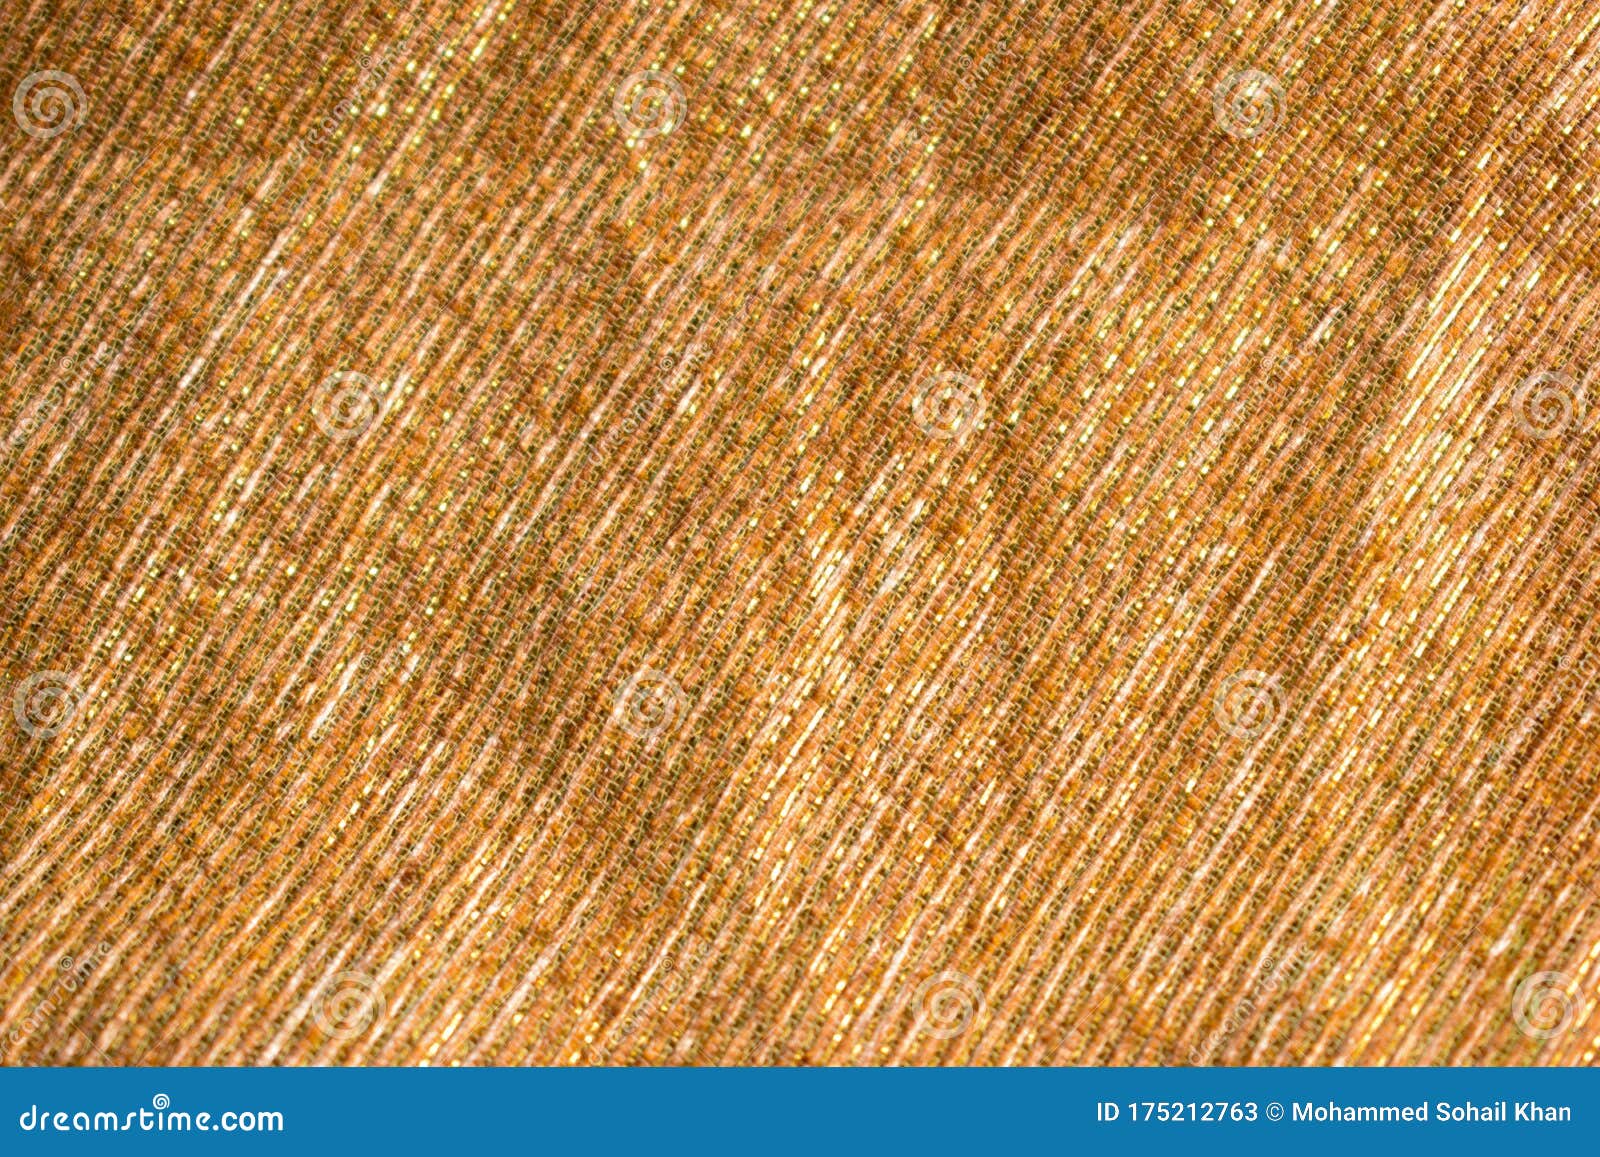 dork yellow color texture of fabric/cloth background stock photograph image